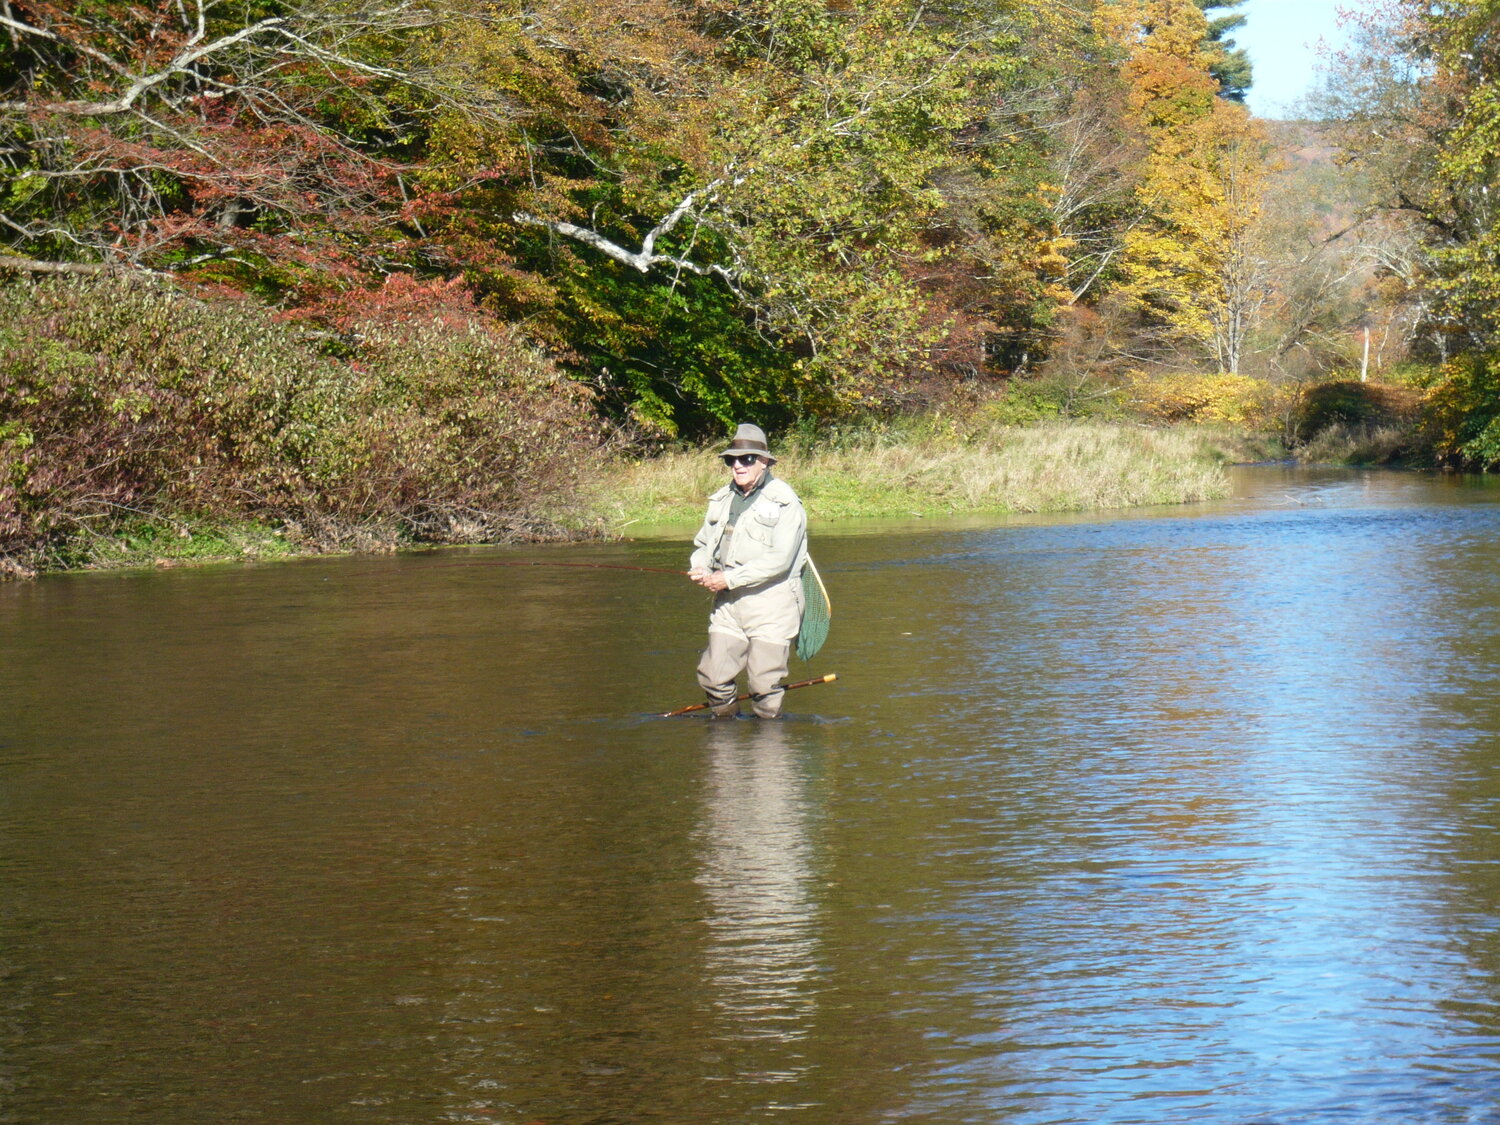 Roger, working a streamer fly at the head of "a favorite pool."